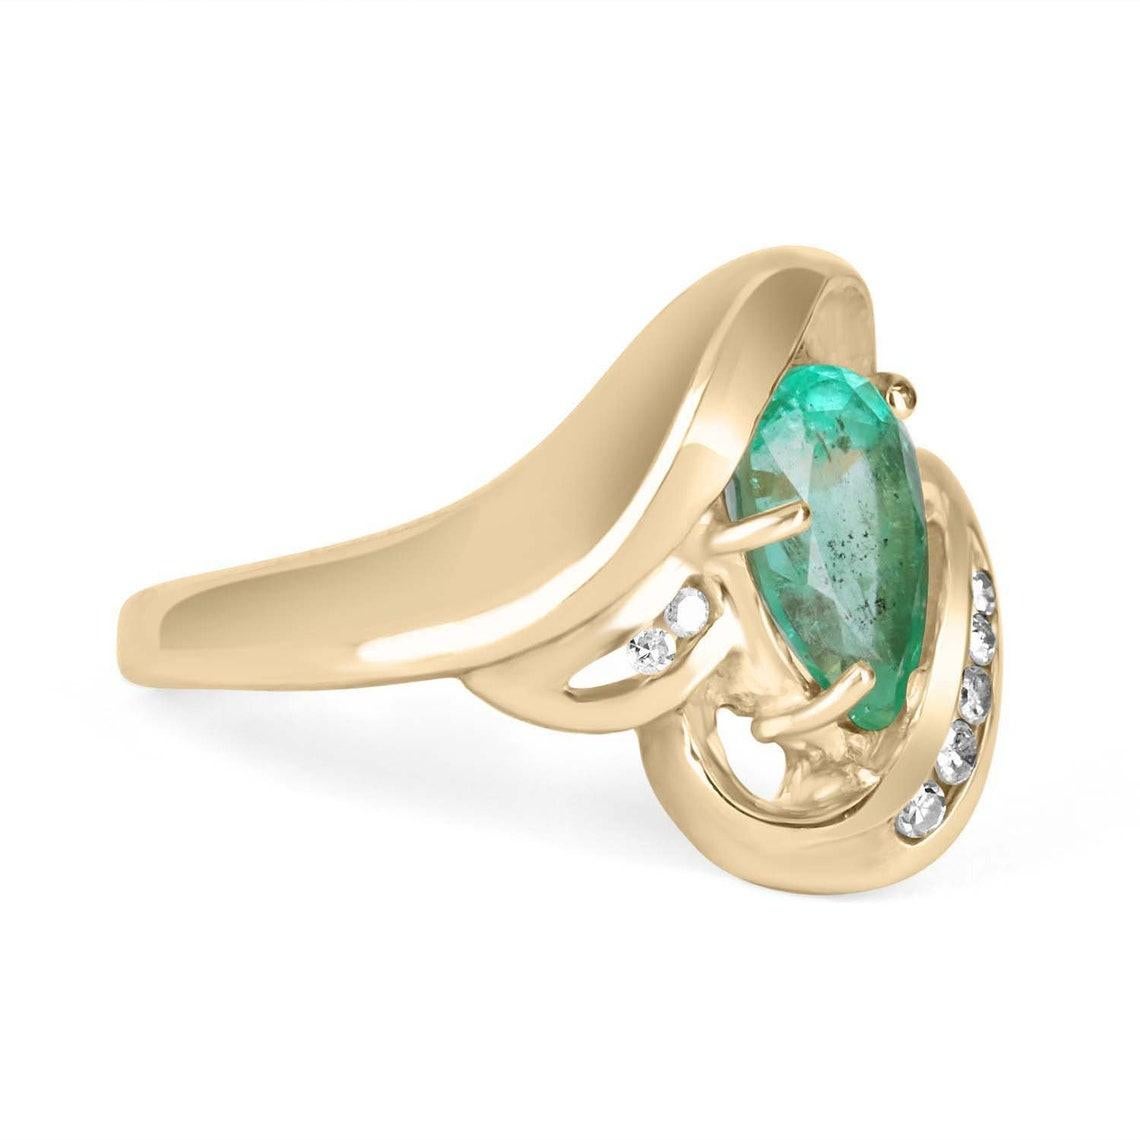 A stunning, pear shape emerald and diamond statement ring, right-hand ring, or just for everyday wear! This gorgeous piece is sure to receive many compliments. An alluring, bluish-green 1.92ct, natural Colombian emerald Emerald cut is nestled in a